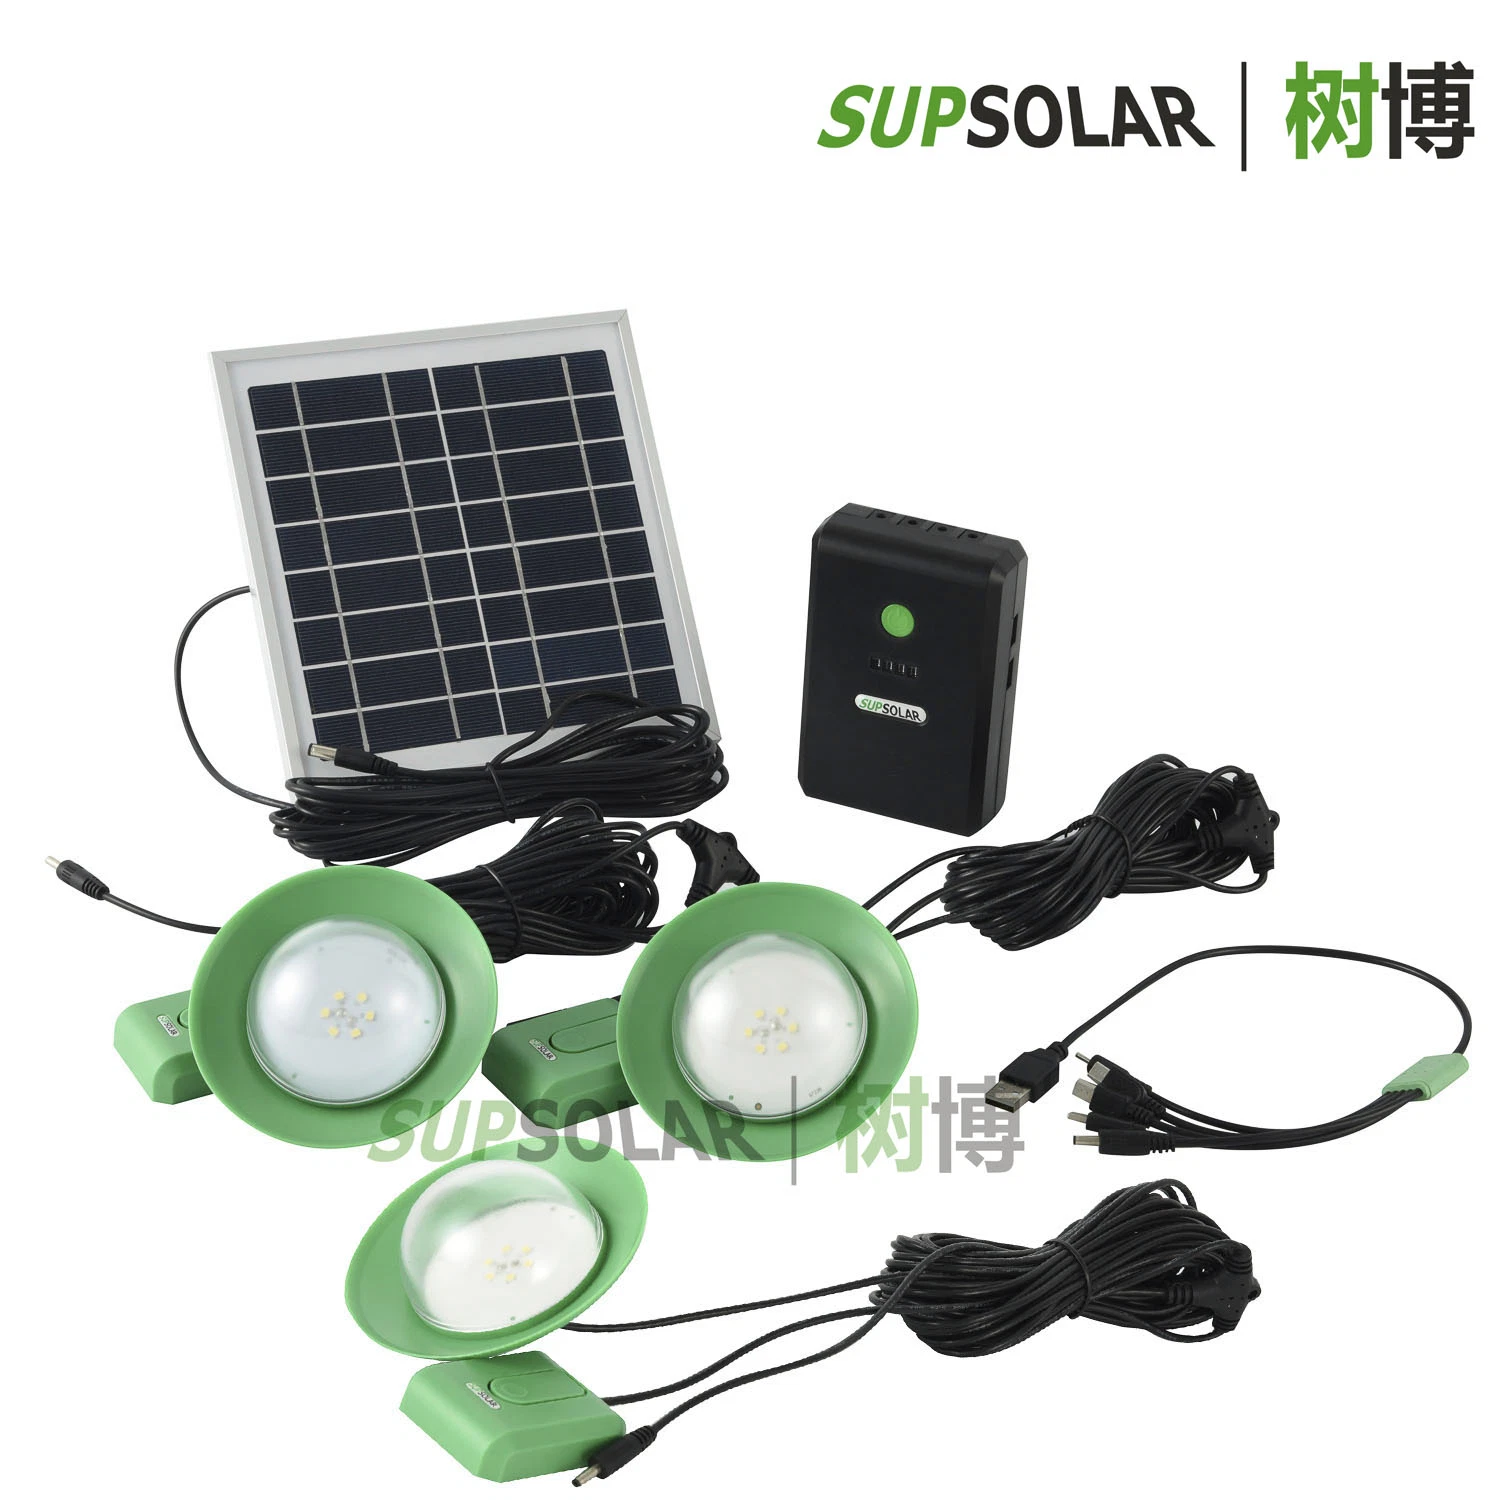 Rural Area Rechargeable LED Lighting Solar Energy Home Kits